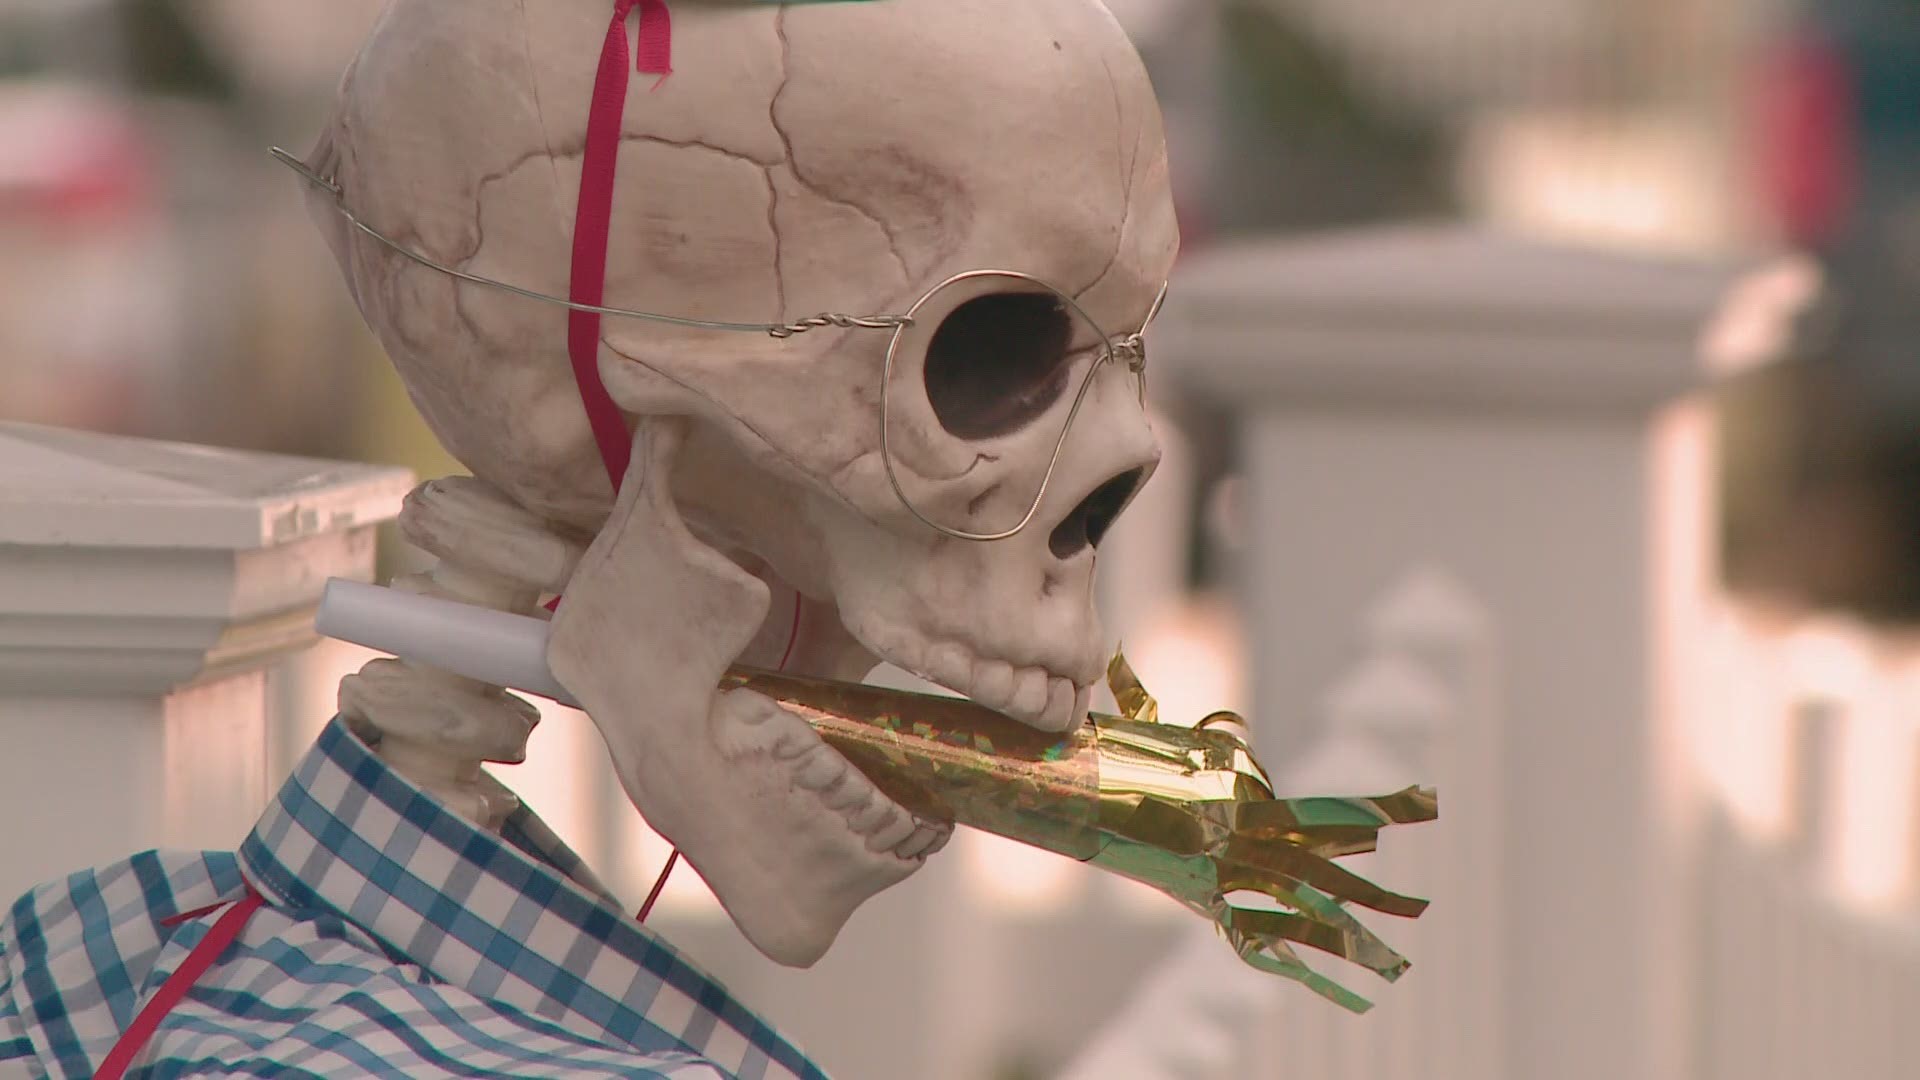 Skeleton couple in Yarmouth bringing joy and laughter during pandemic